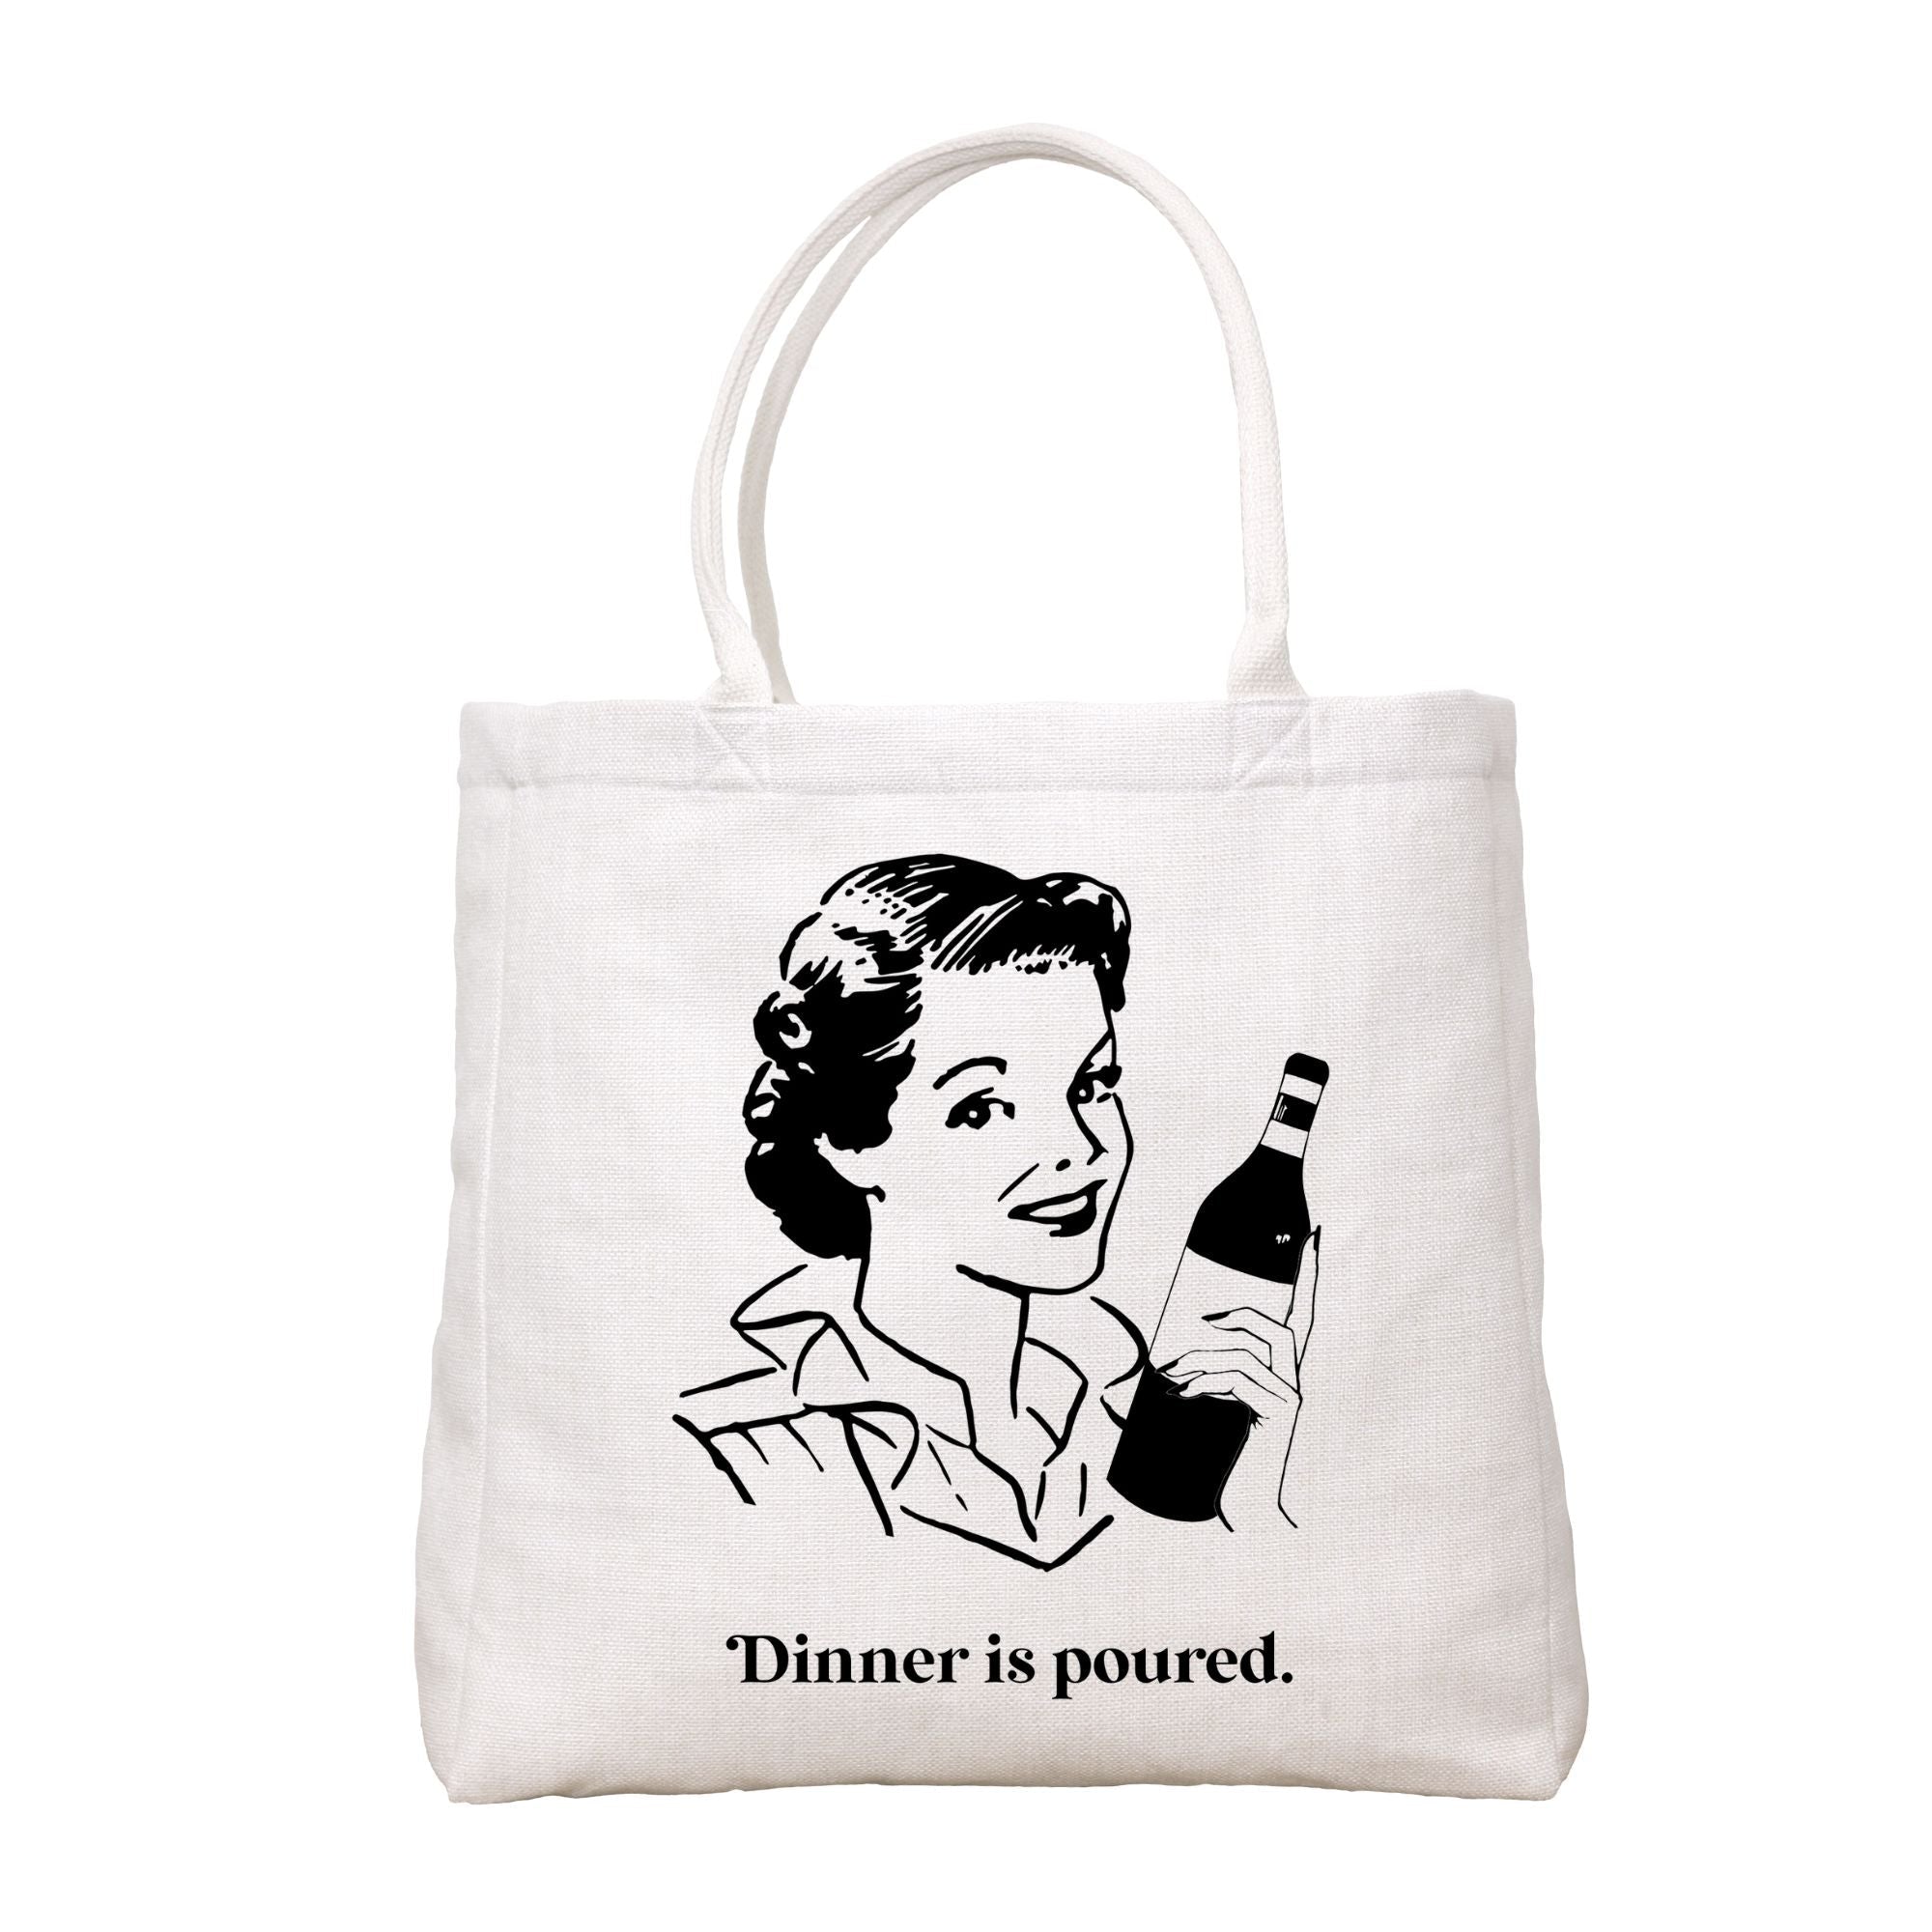 Dinner Is Poured Tote Bag